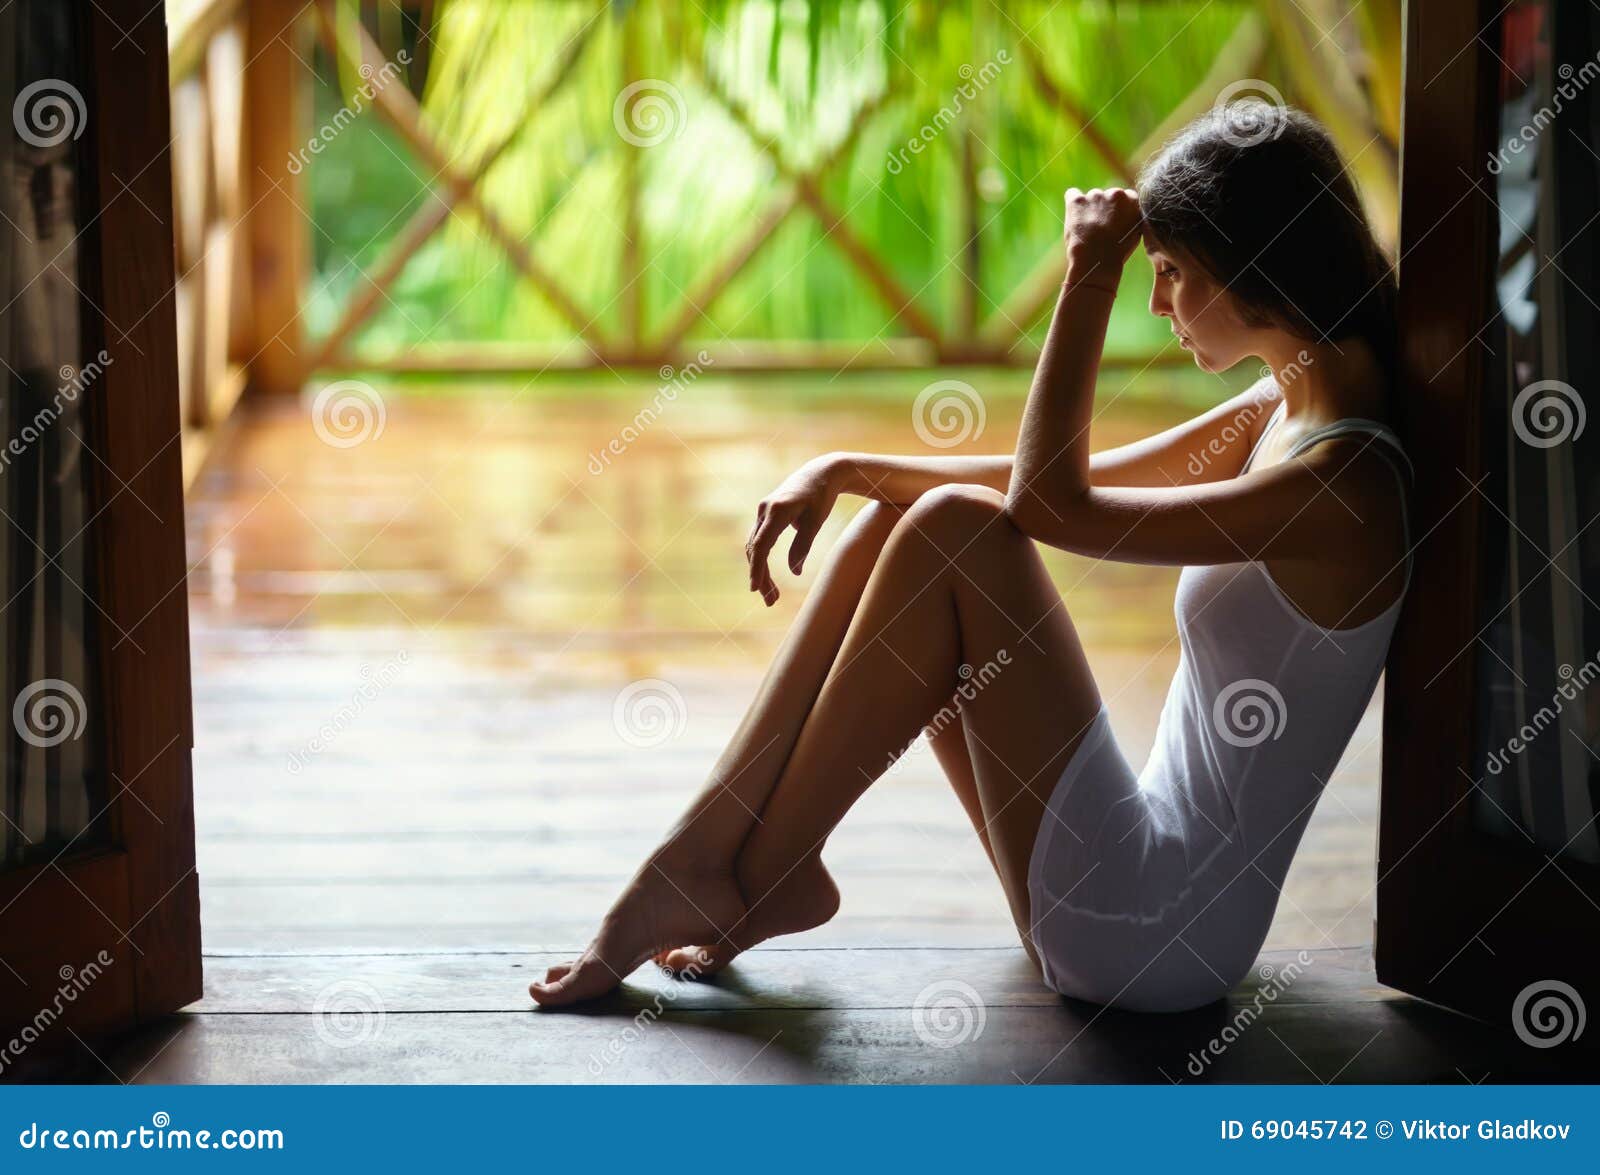 Sad Lonely Woman Sitting on the Porch during the Rain Stock Photo ...